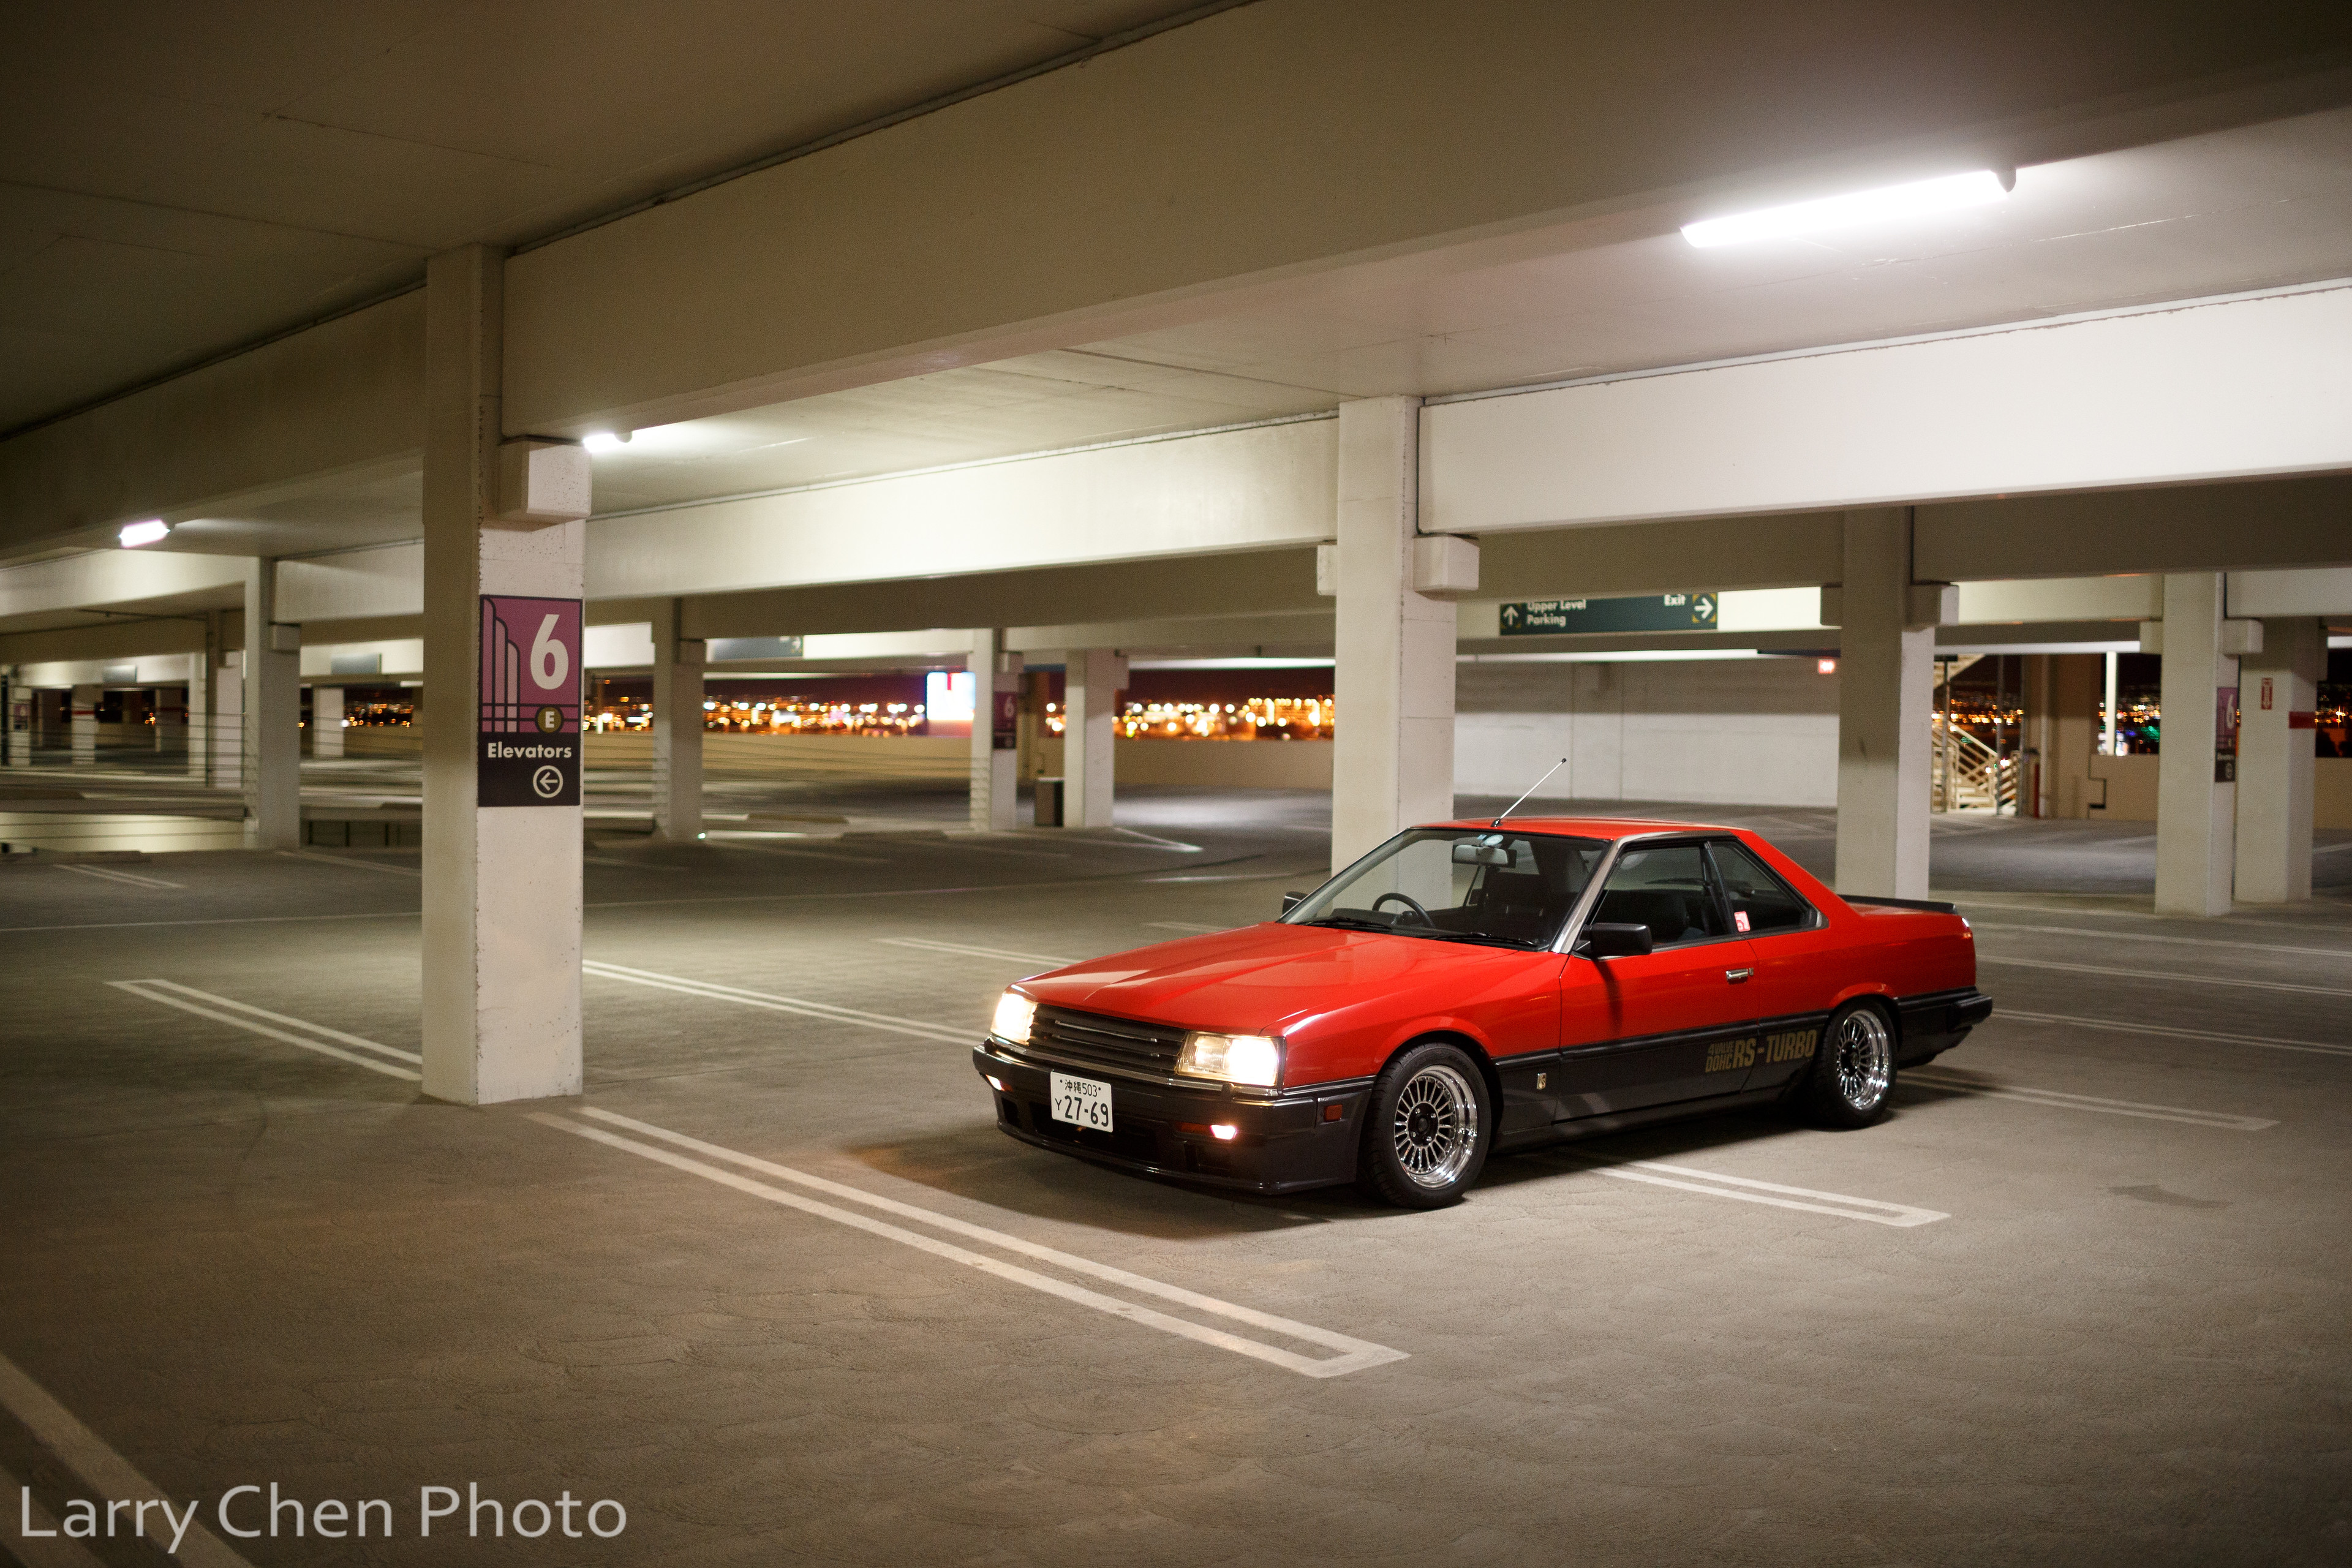 General 3840x2560 Nissan Skyline red cars Japanese cars night city lights sports car Larry Chen Nissan